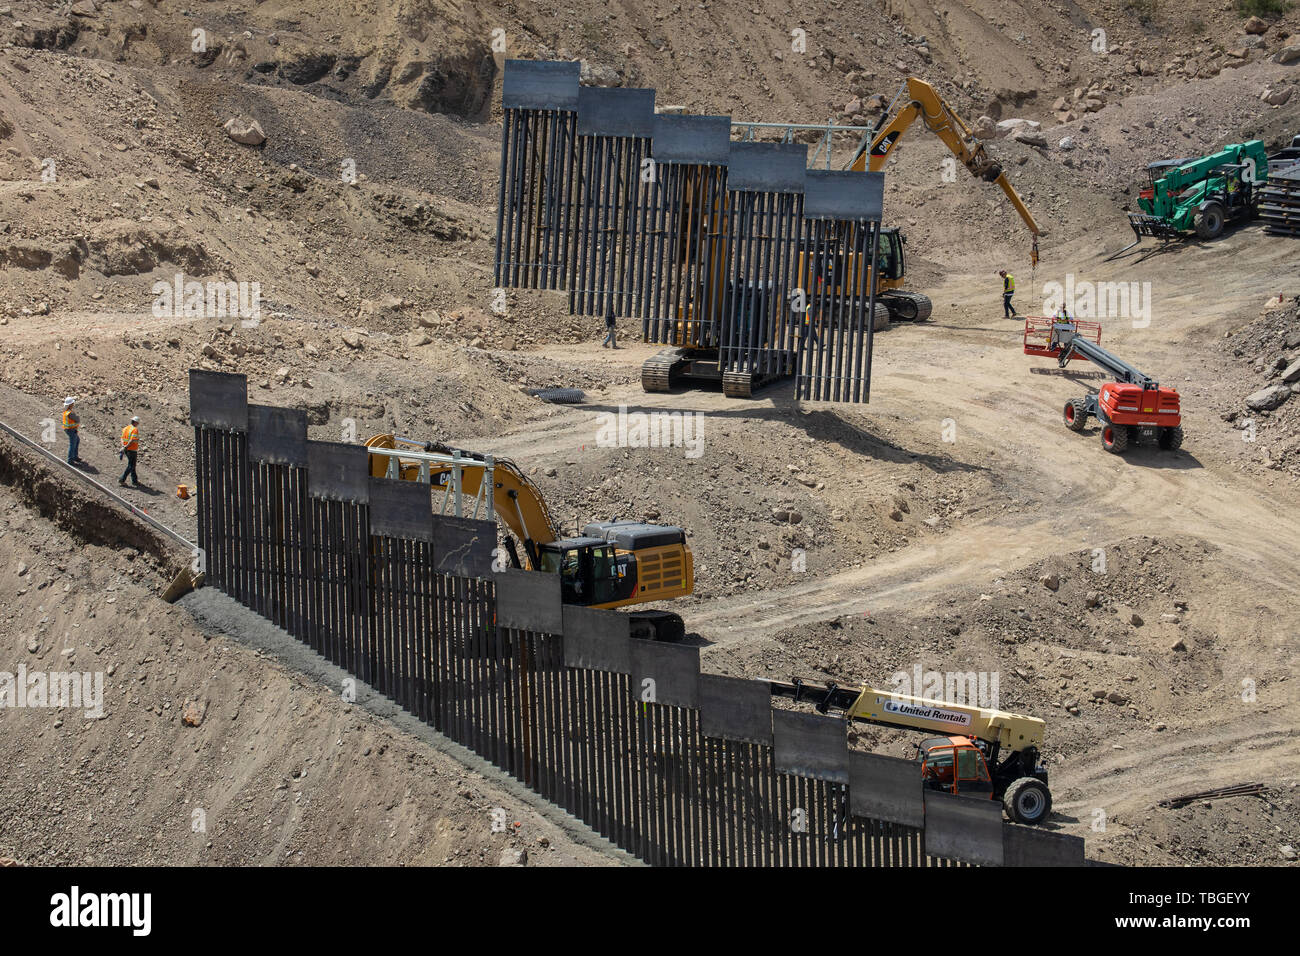 Workers assemble a section of border fence near El Paso, Texas, part of the privately-funded scheme by We Build The Wall, Inc. 30 May 2019 Stock Photo